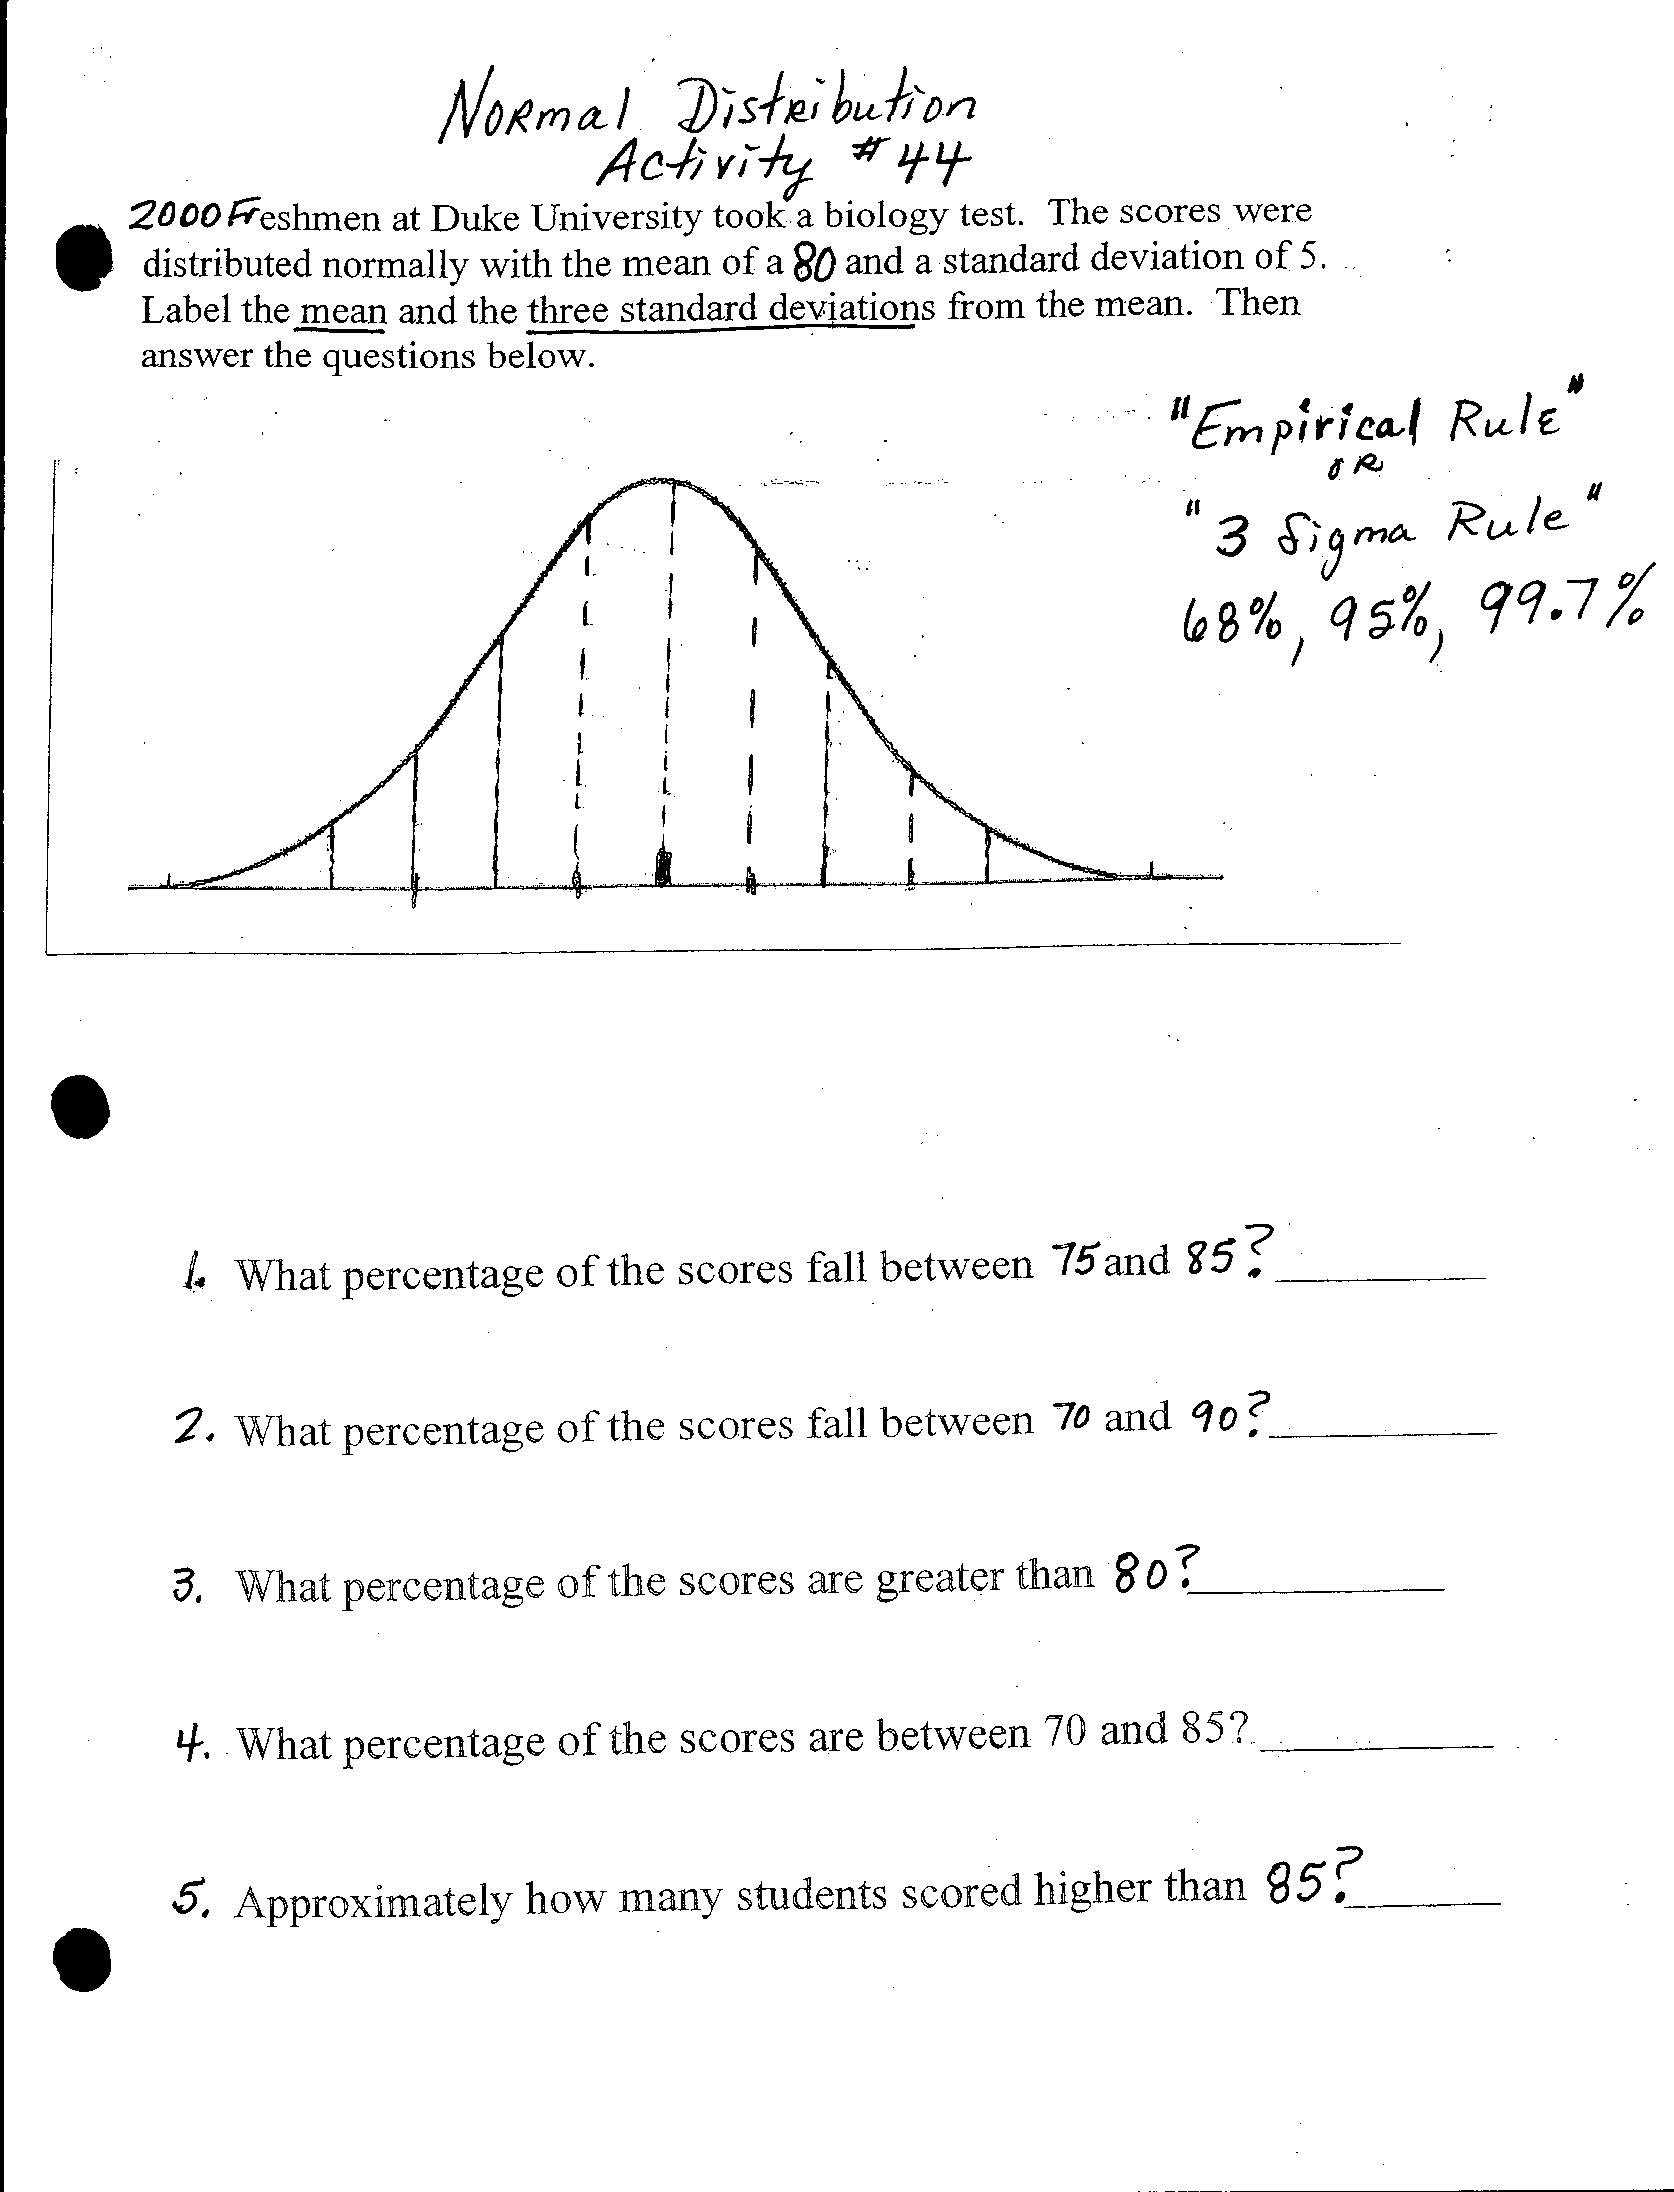 the-normal-distribution-worksheet-free-download-goodimg-co